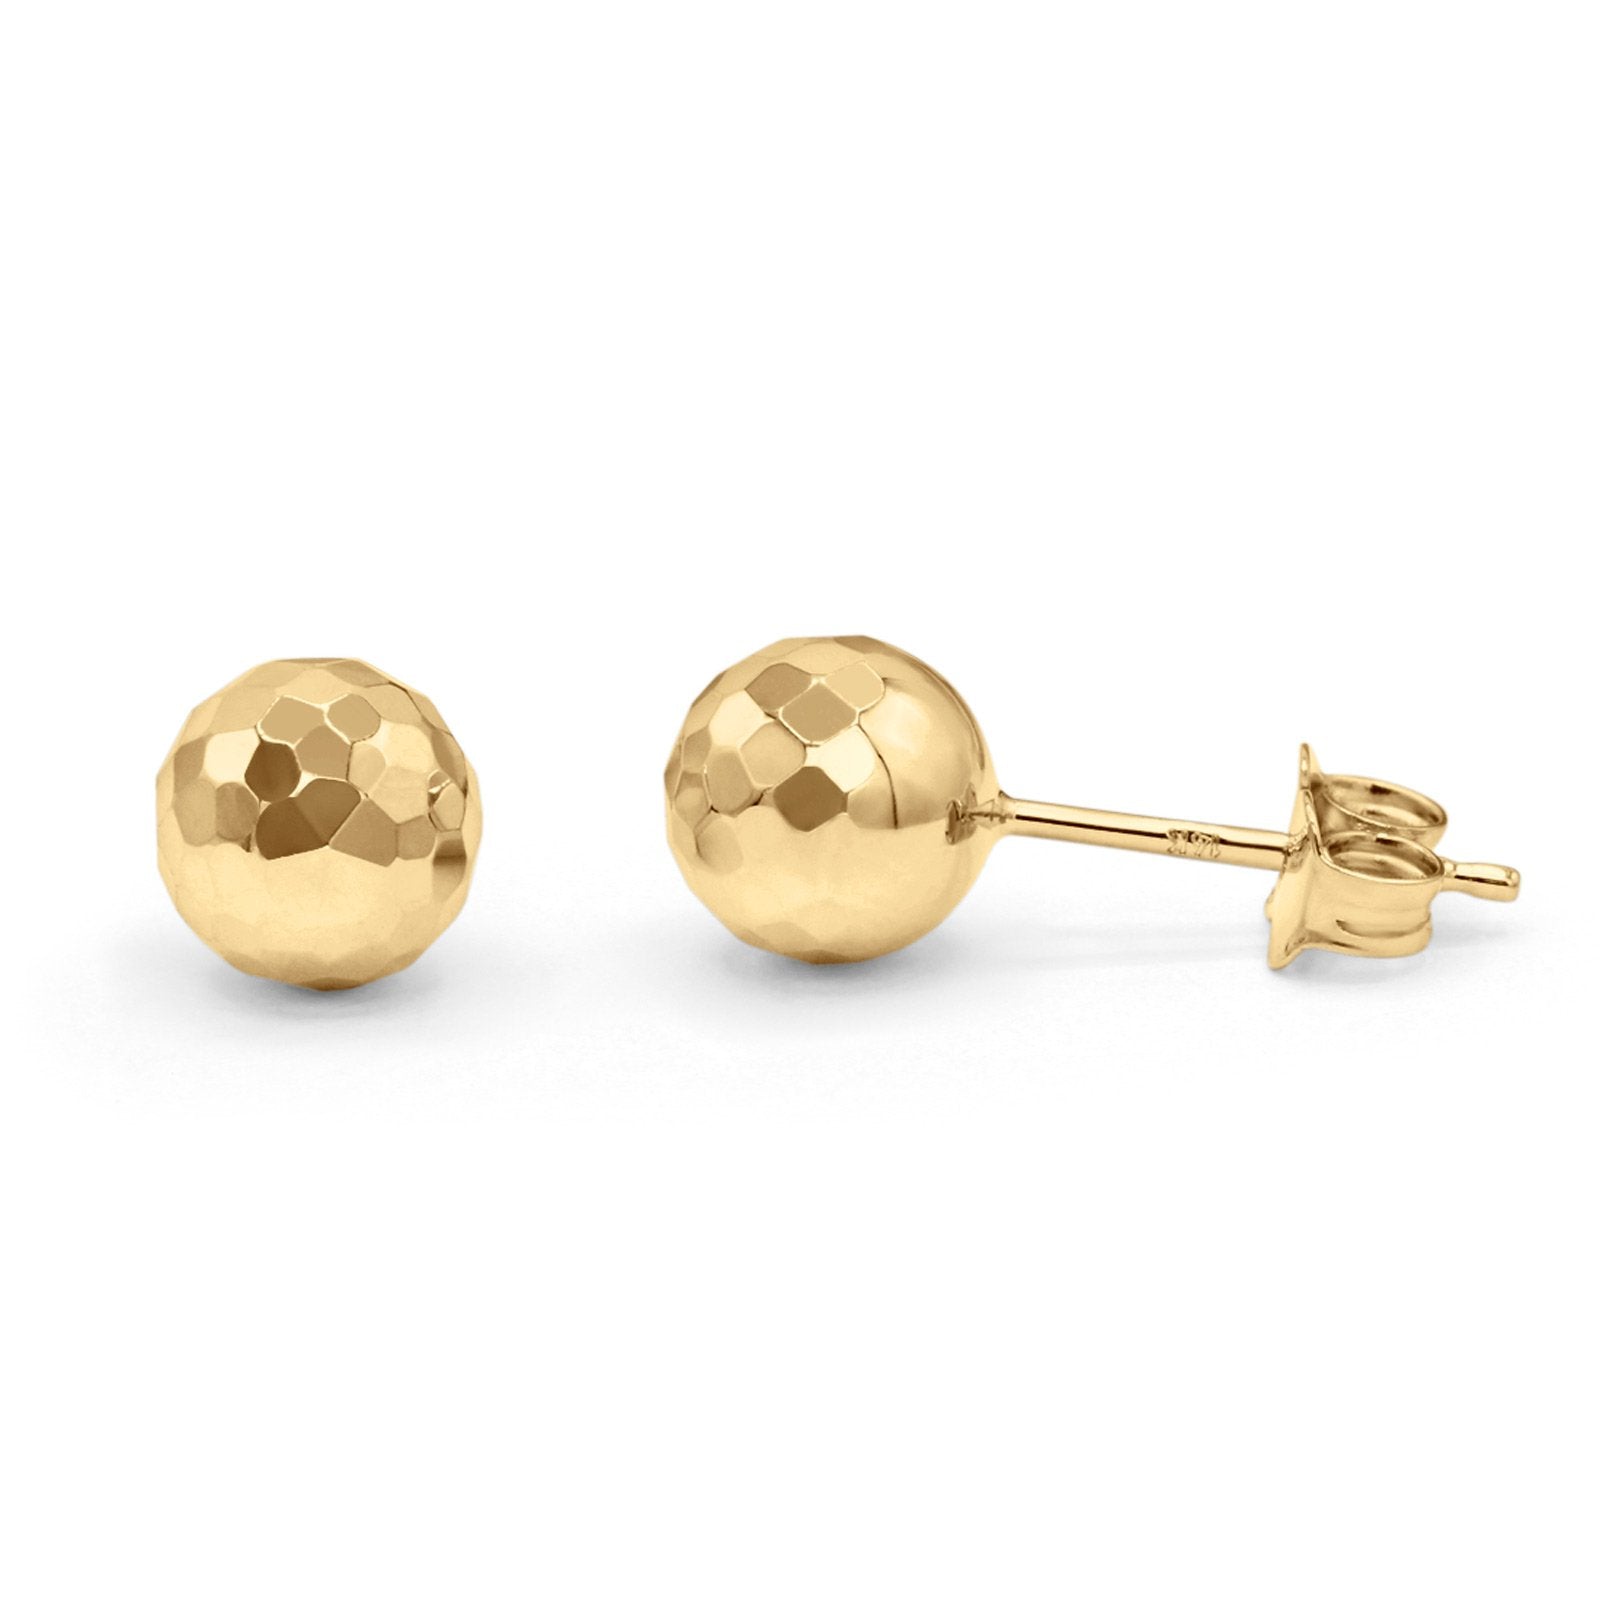 14K Yellow Gold Hammered Finish Tiny Ball Post Stud Earring For Women Or Girls 7mm